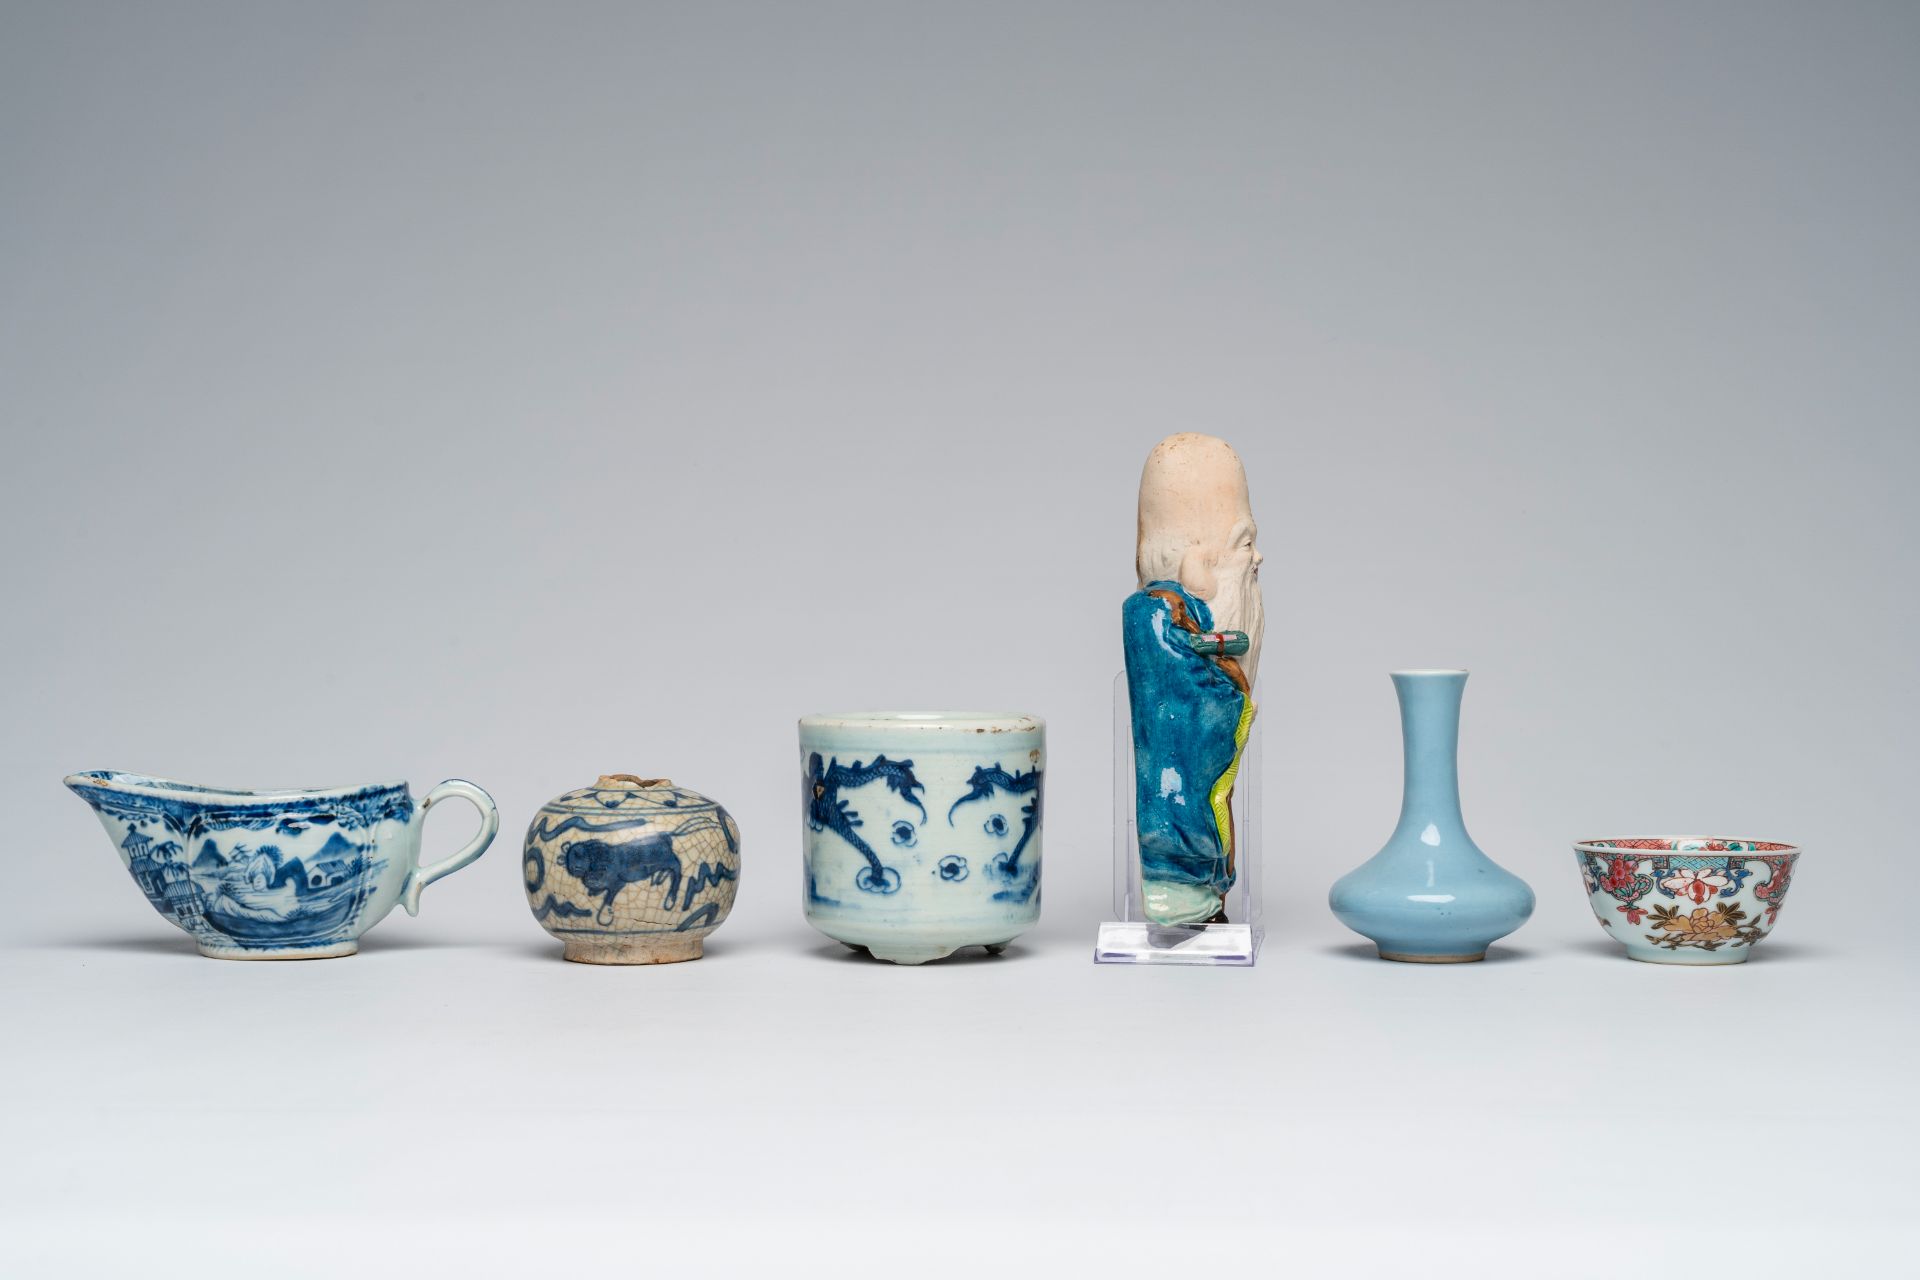 A varied collection of Chinese and Japanese porcelain, 18th C. and later - Image 4 of 9